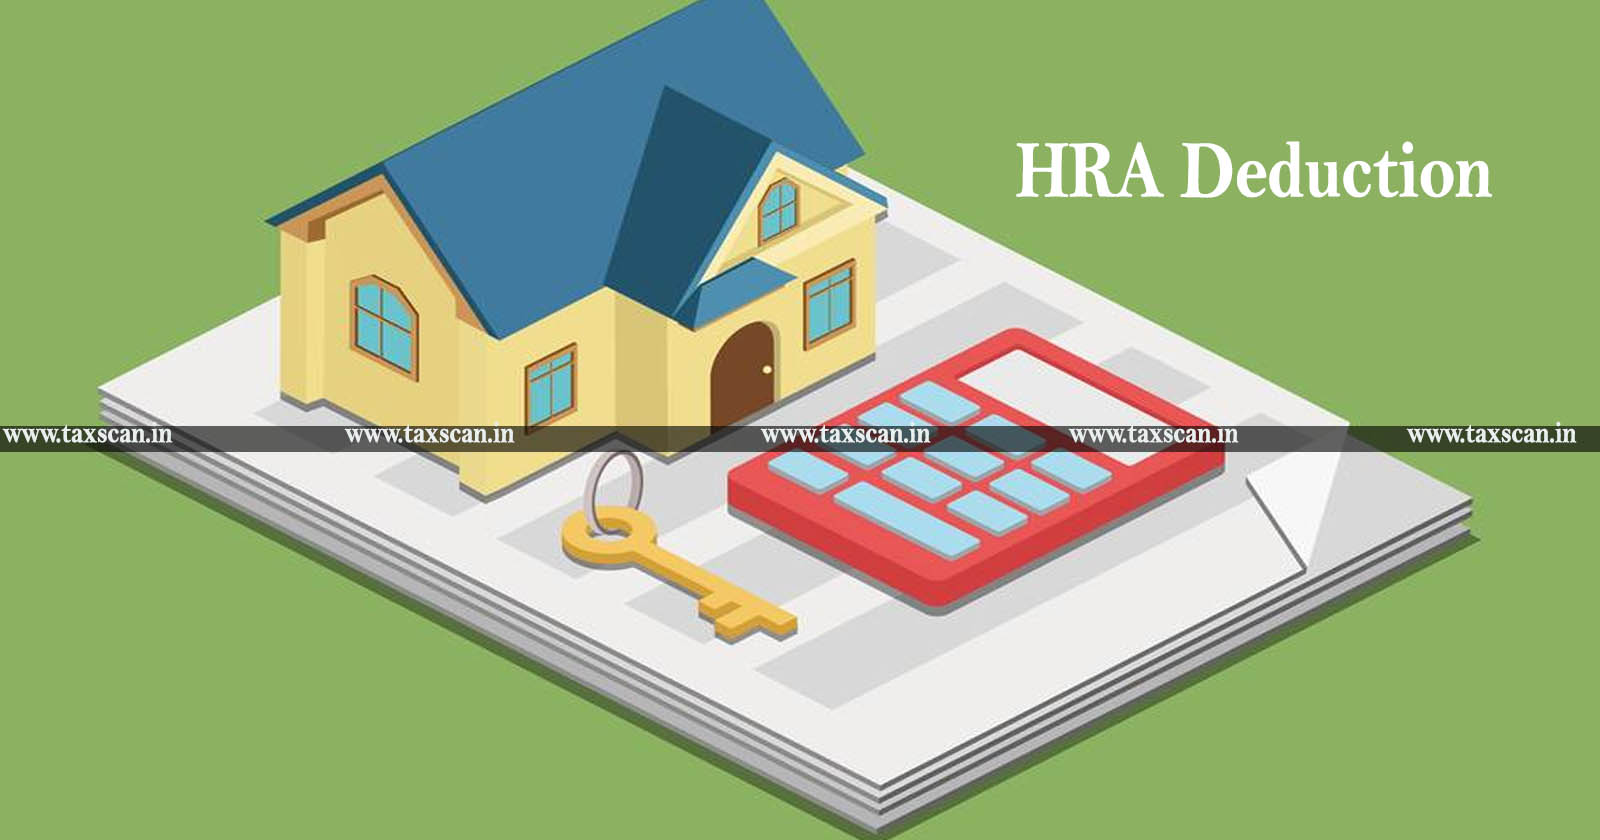 Hra Deduction Income Tax Act